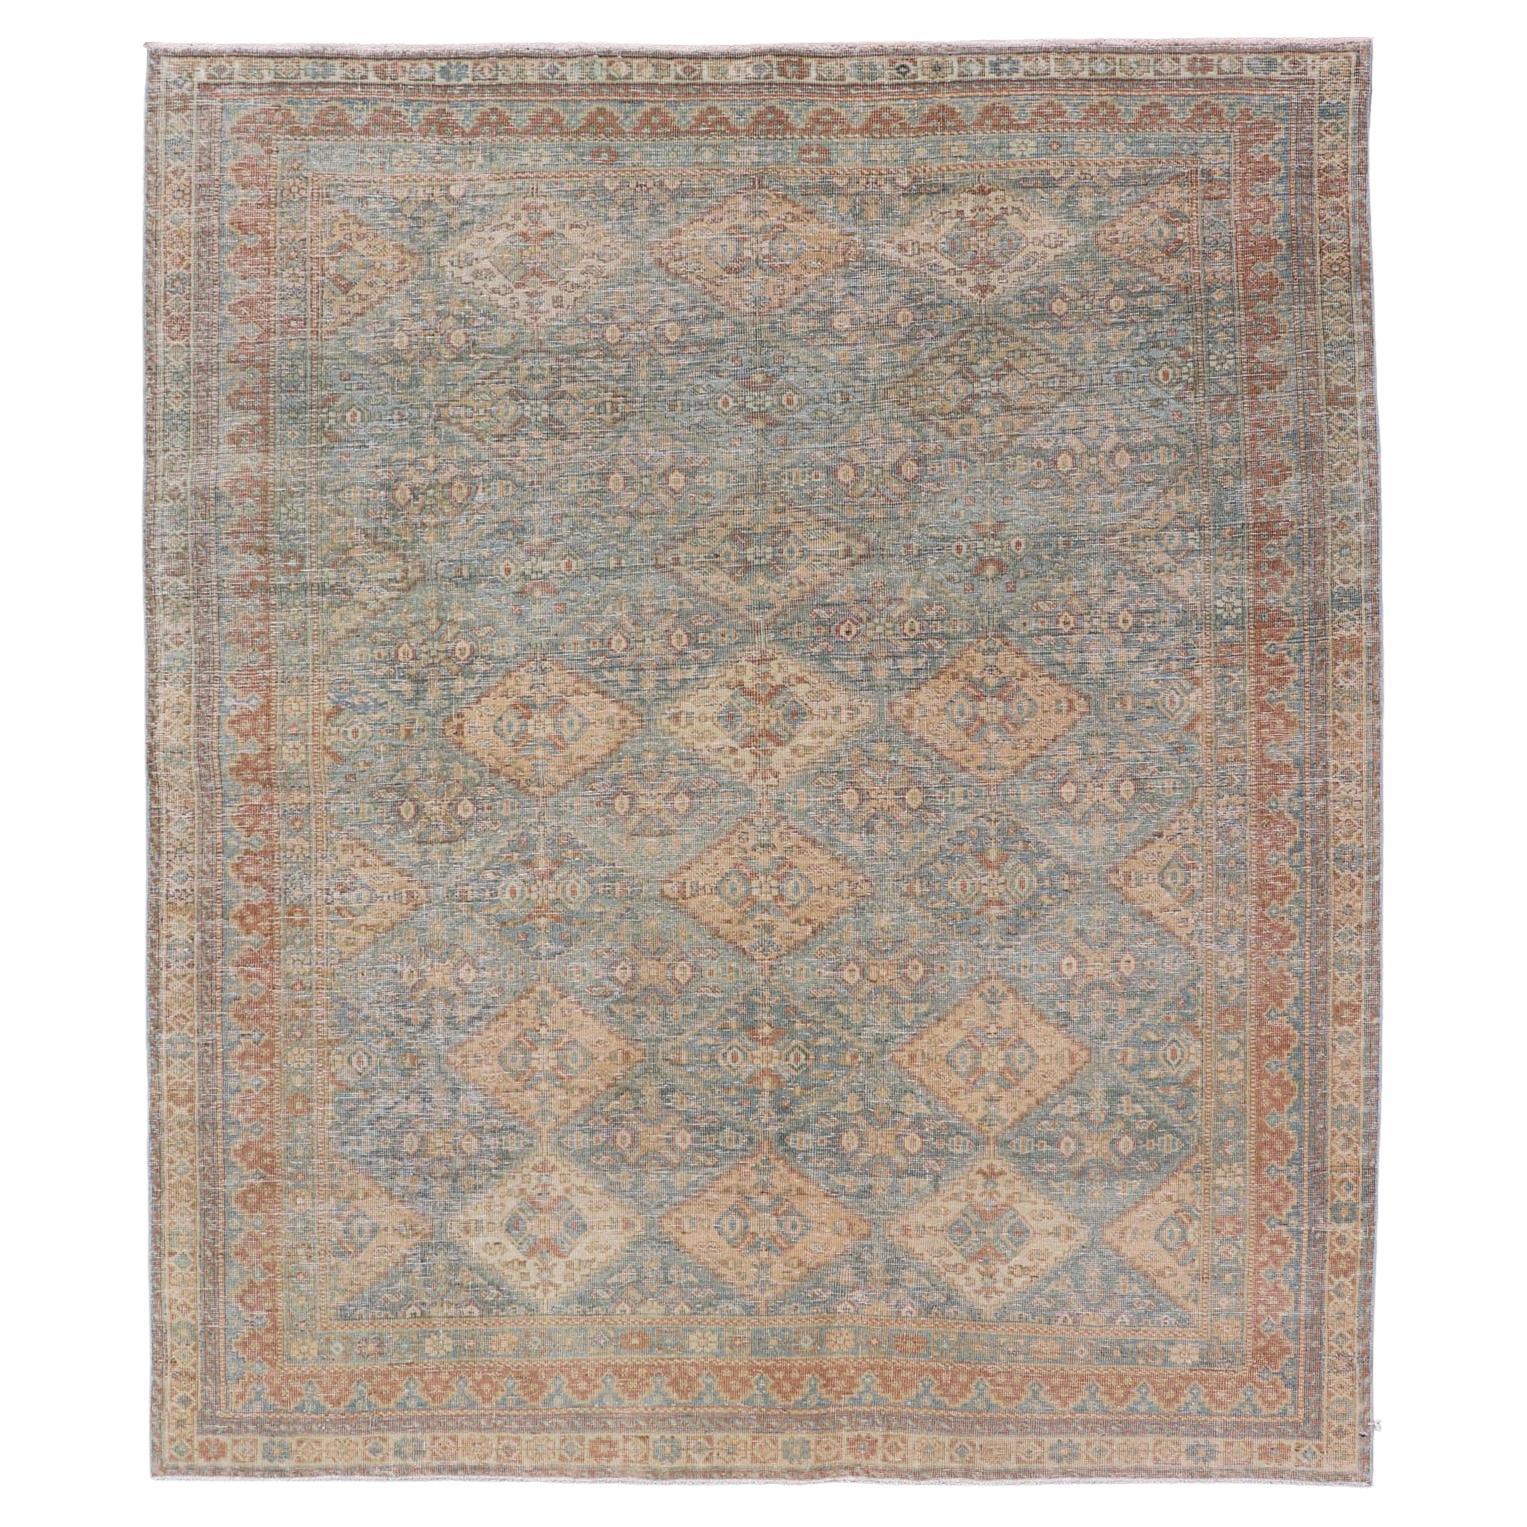 Antique Persian Tabriz Rug in Wool with Diamond Design in Blue, Apricot & Gray